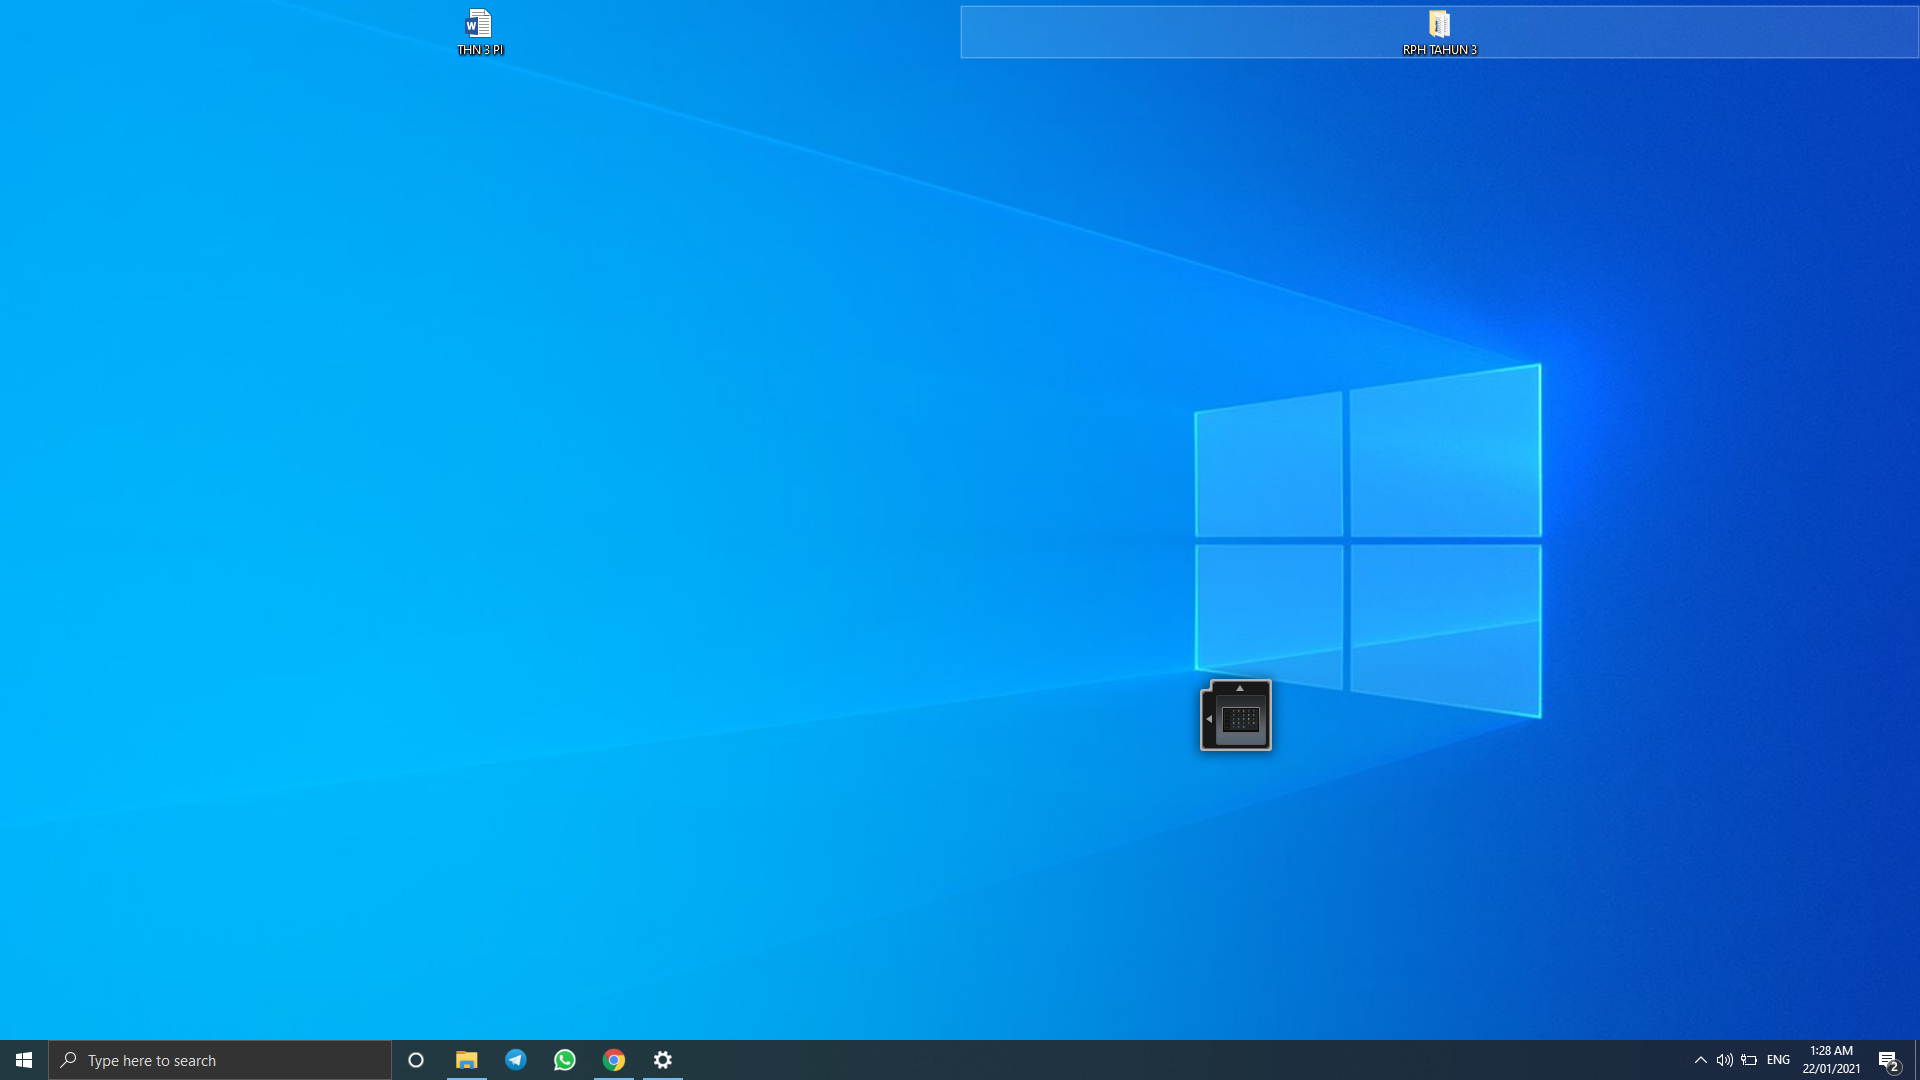 Icons Occupied Space on Windows 10 1b8abb92-7728-4777-8c93-5b733d9ba237?upload=true.png